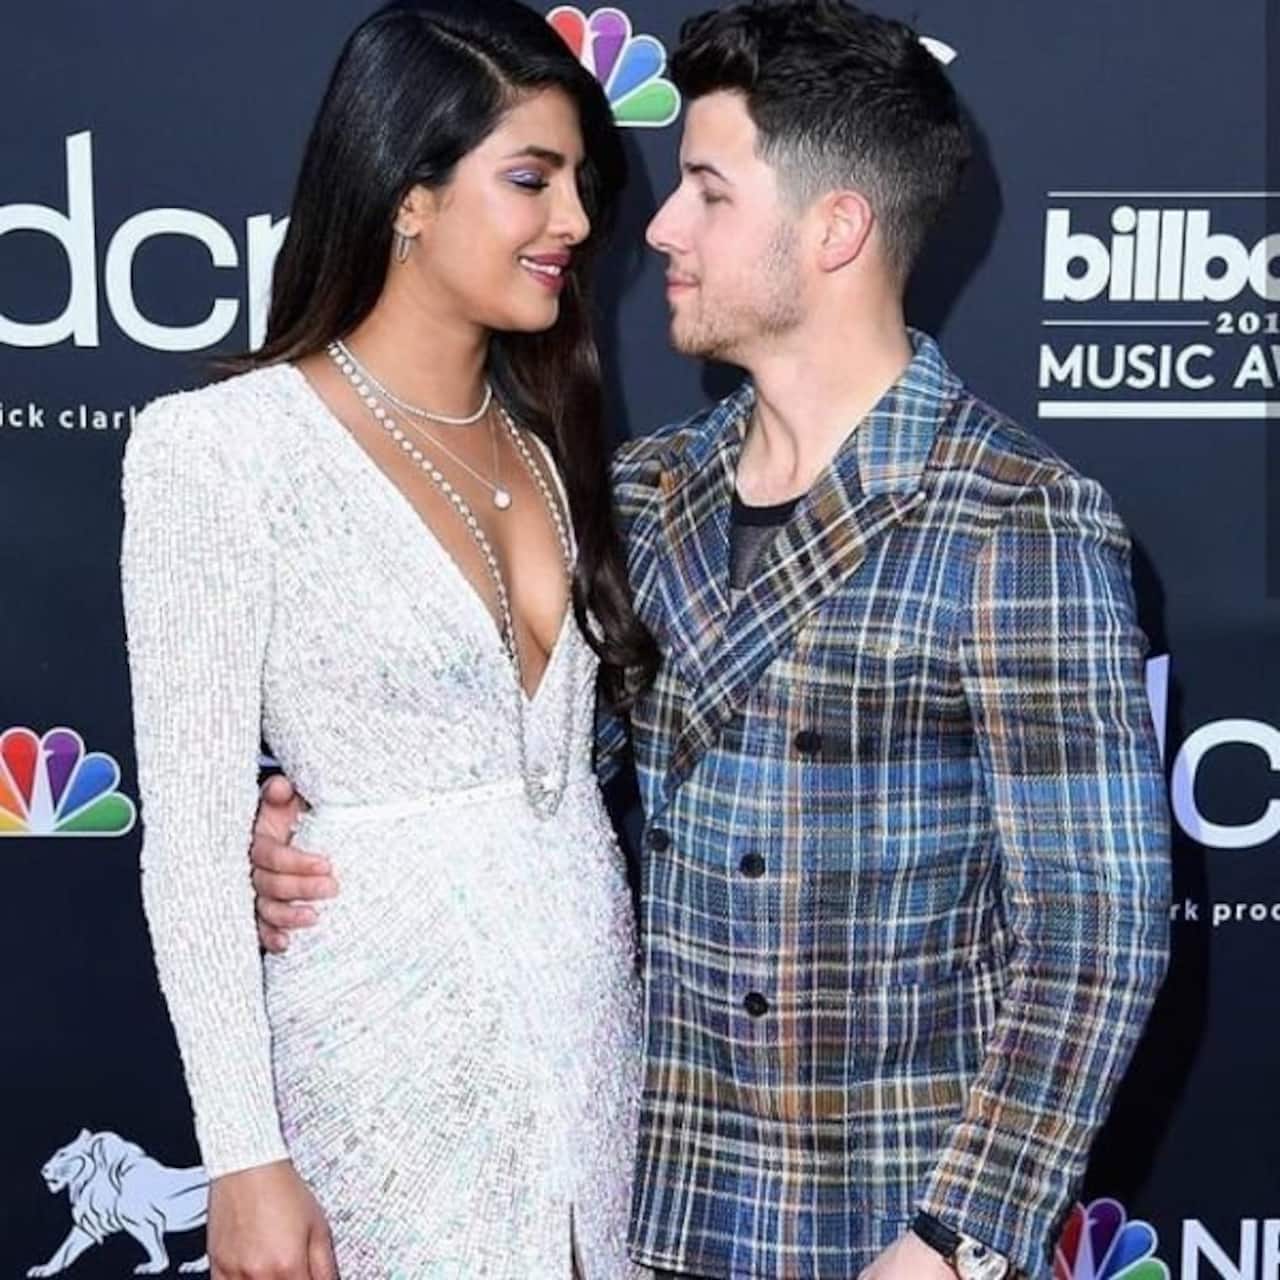 Priyanka Chopra and Nick Jonas steal a kiss at the Billboard Music Awards 2019 and their PDA will leave you all mushy - watch video